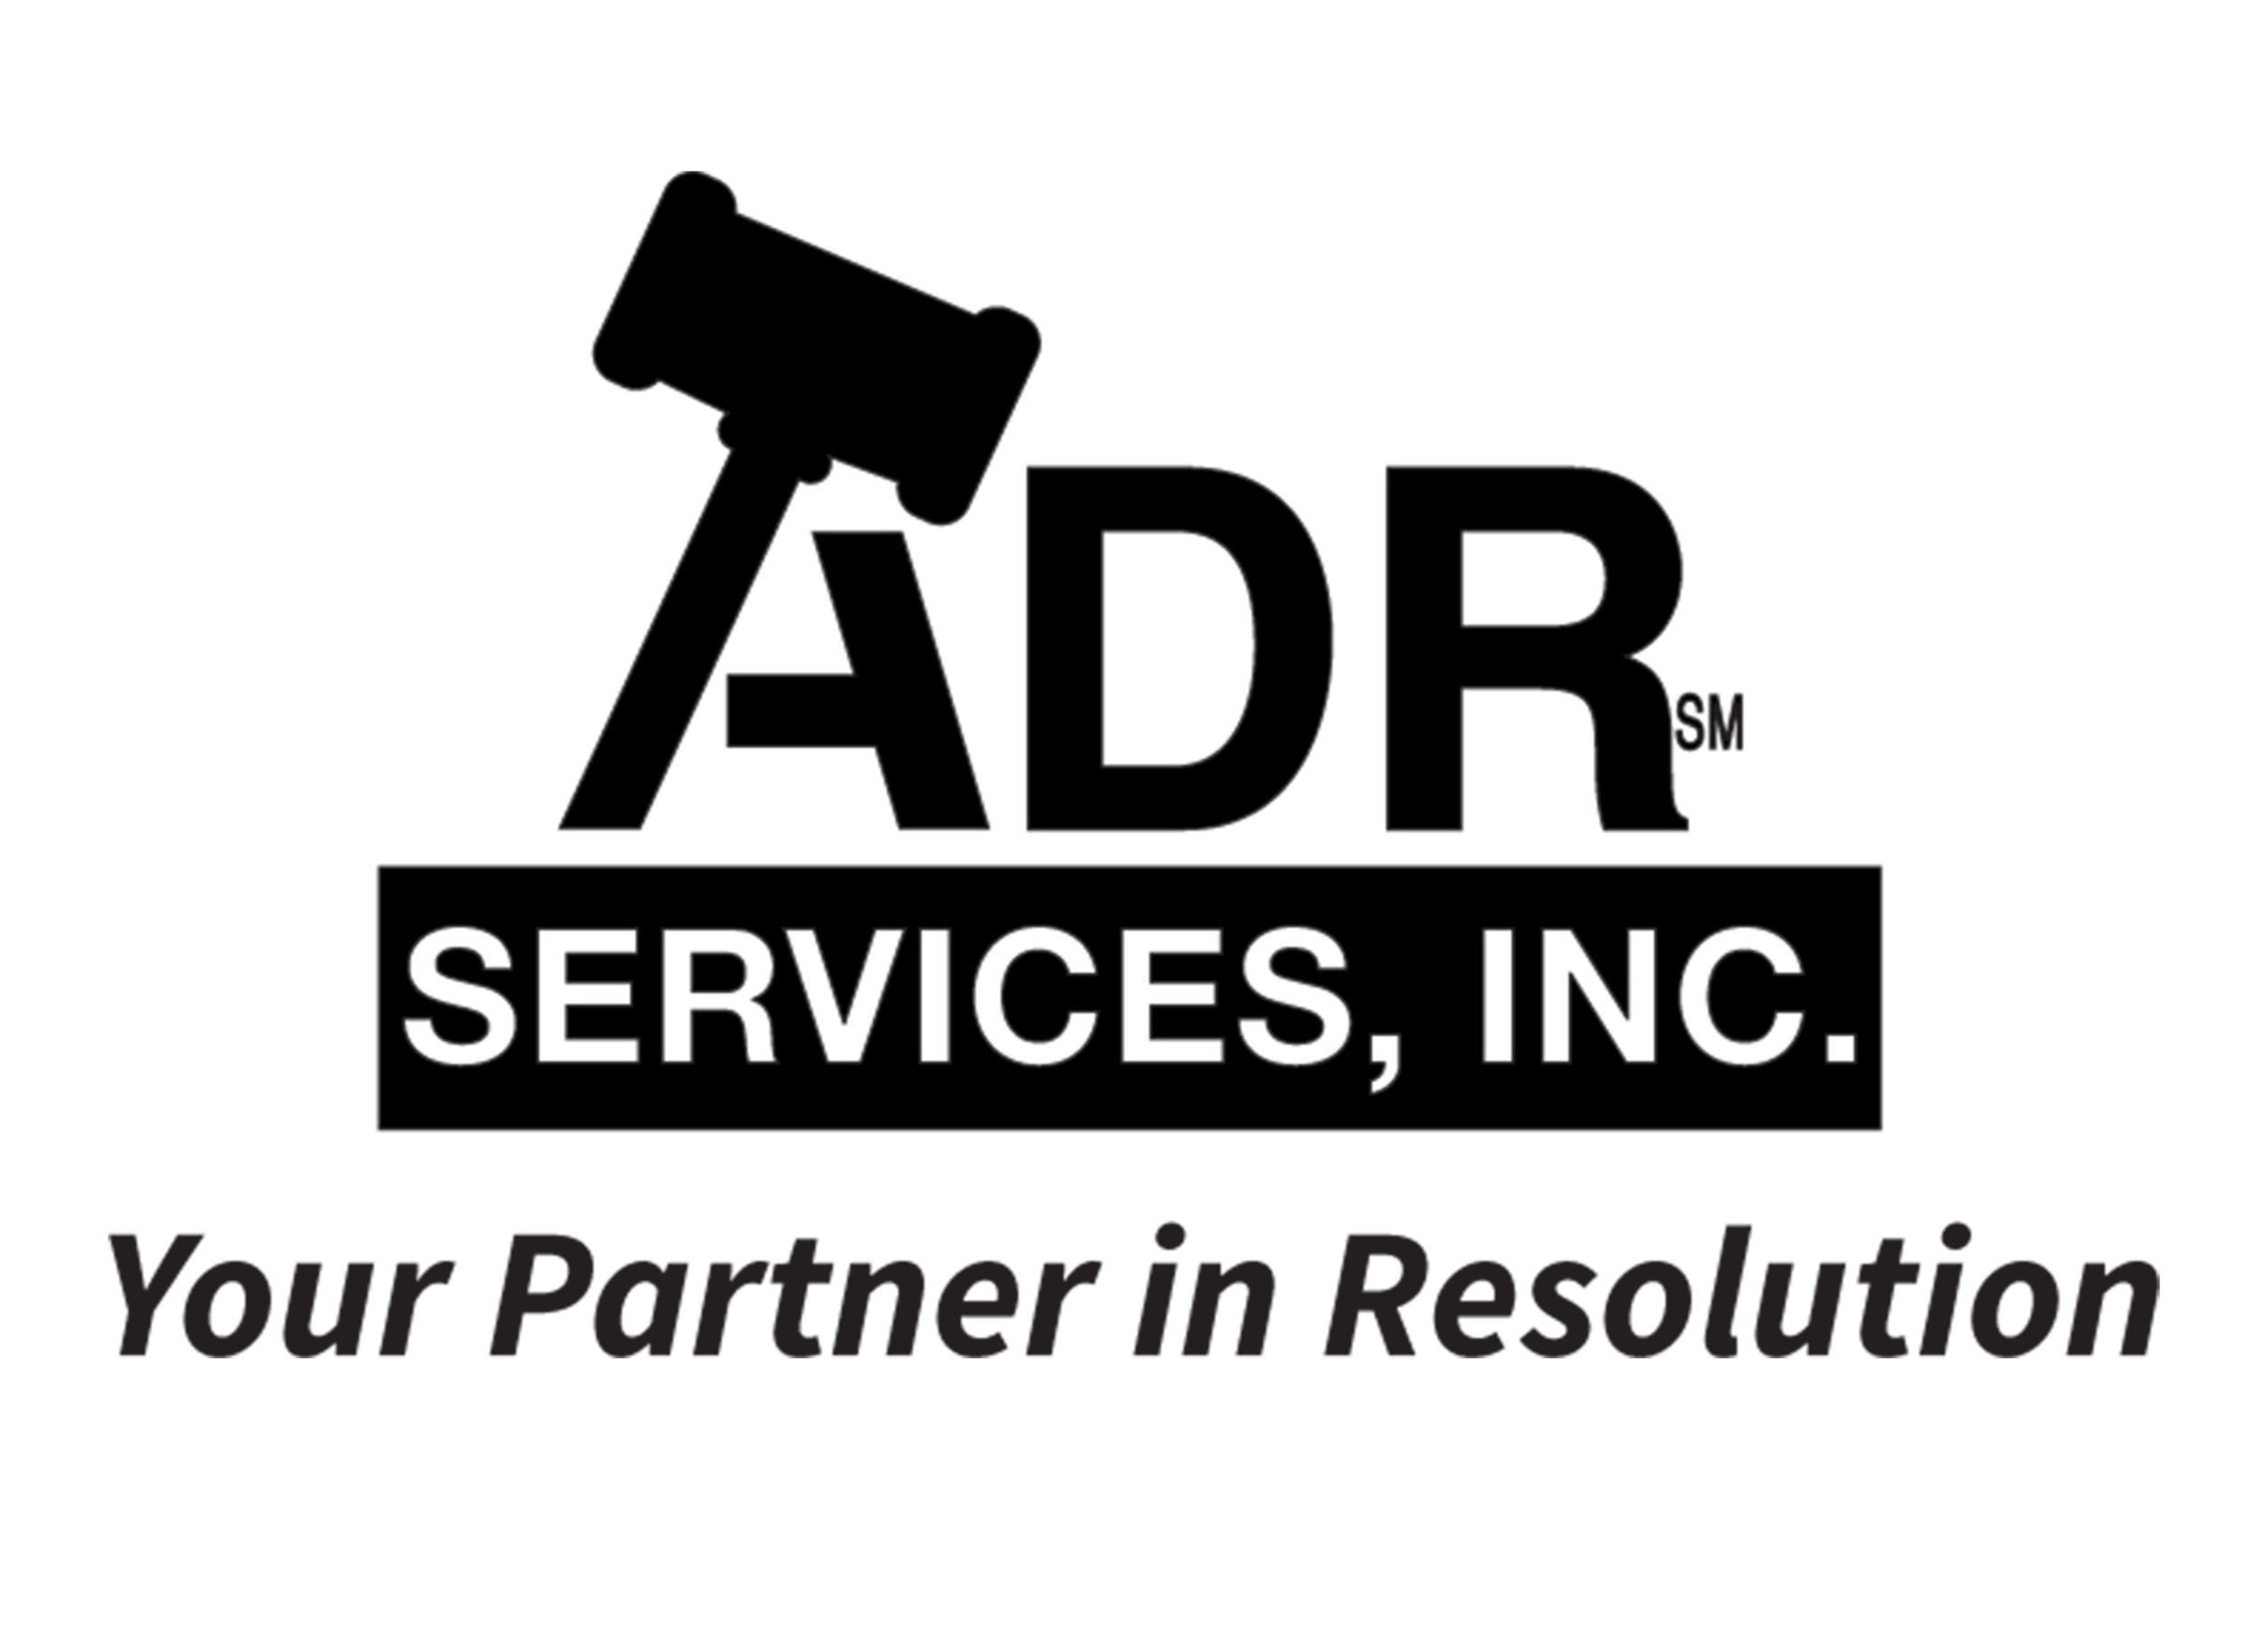 ADRS 2018 logo.png